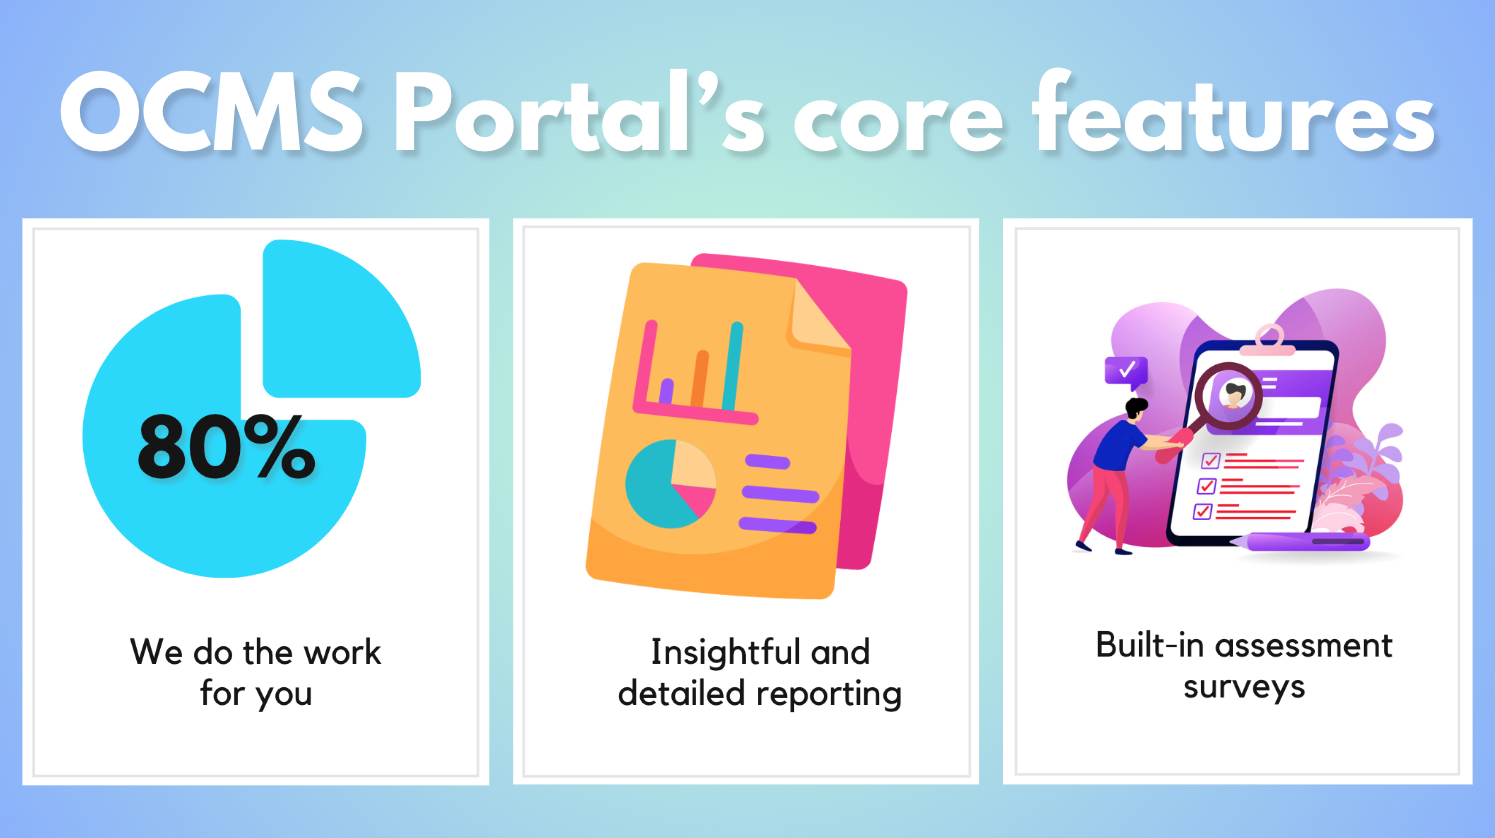 The main features of OCMS Portal